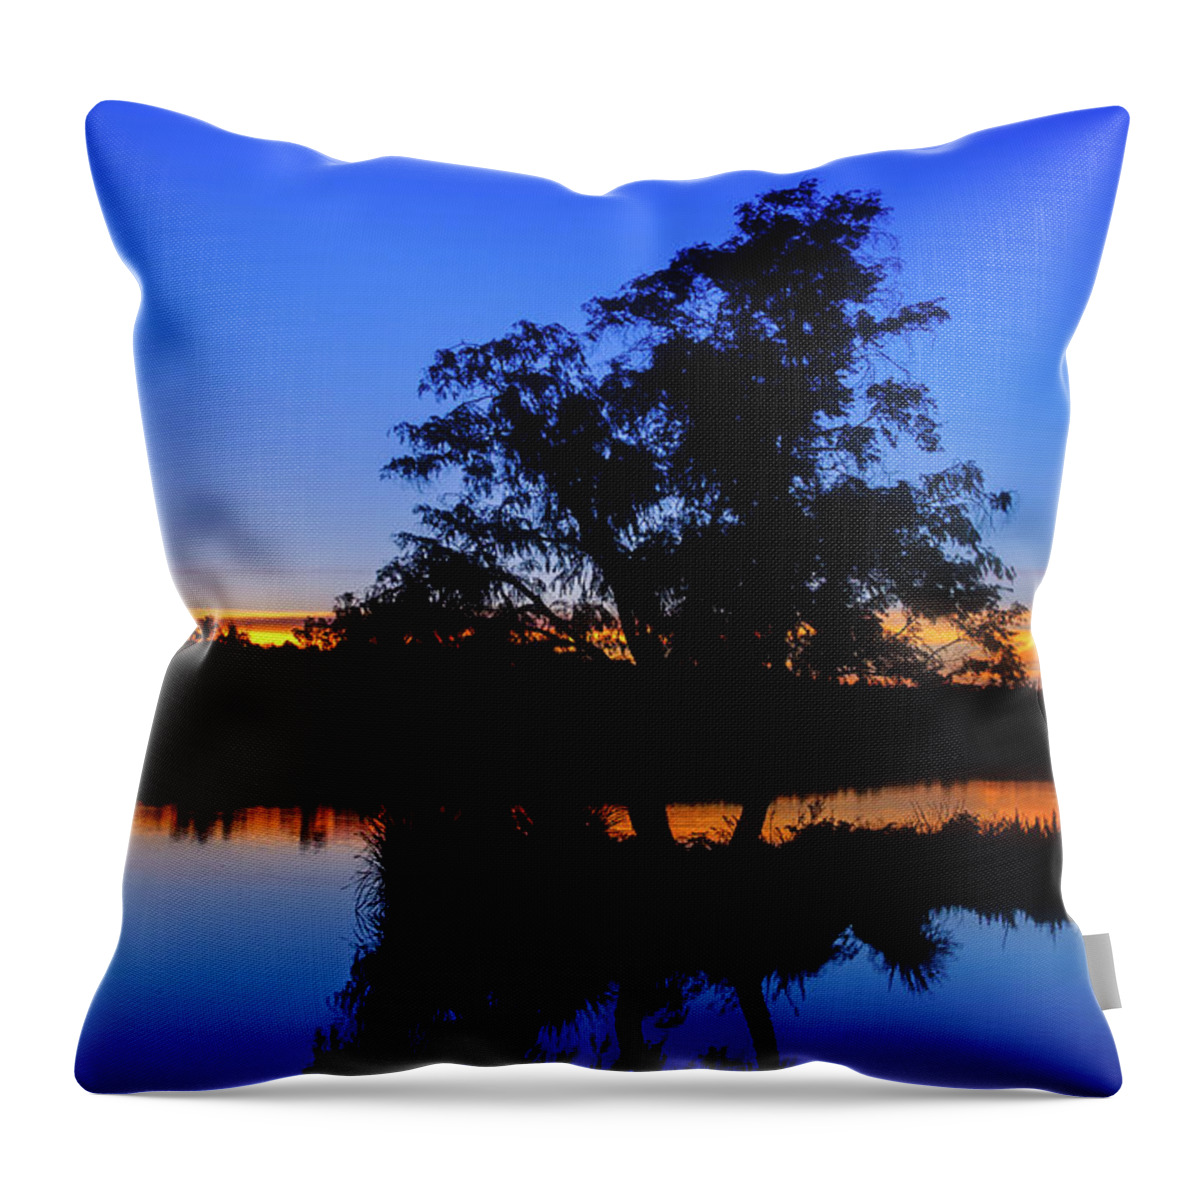 Mad About Wa Throw Pillow featuring the photograph Wagardu Lake, Yanchep National Park by Dave Catley